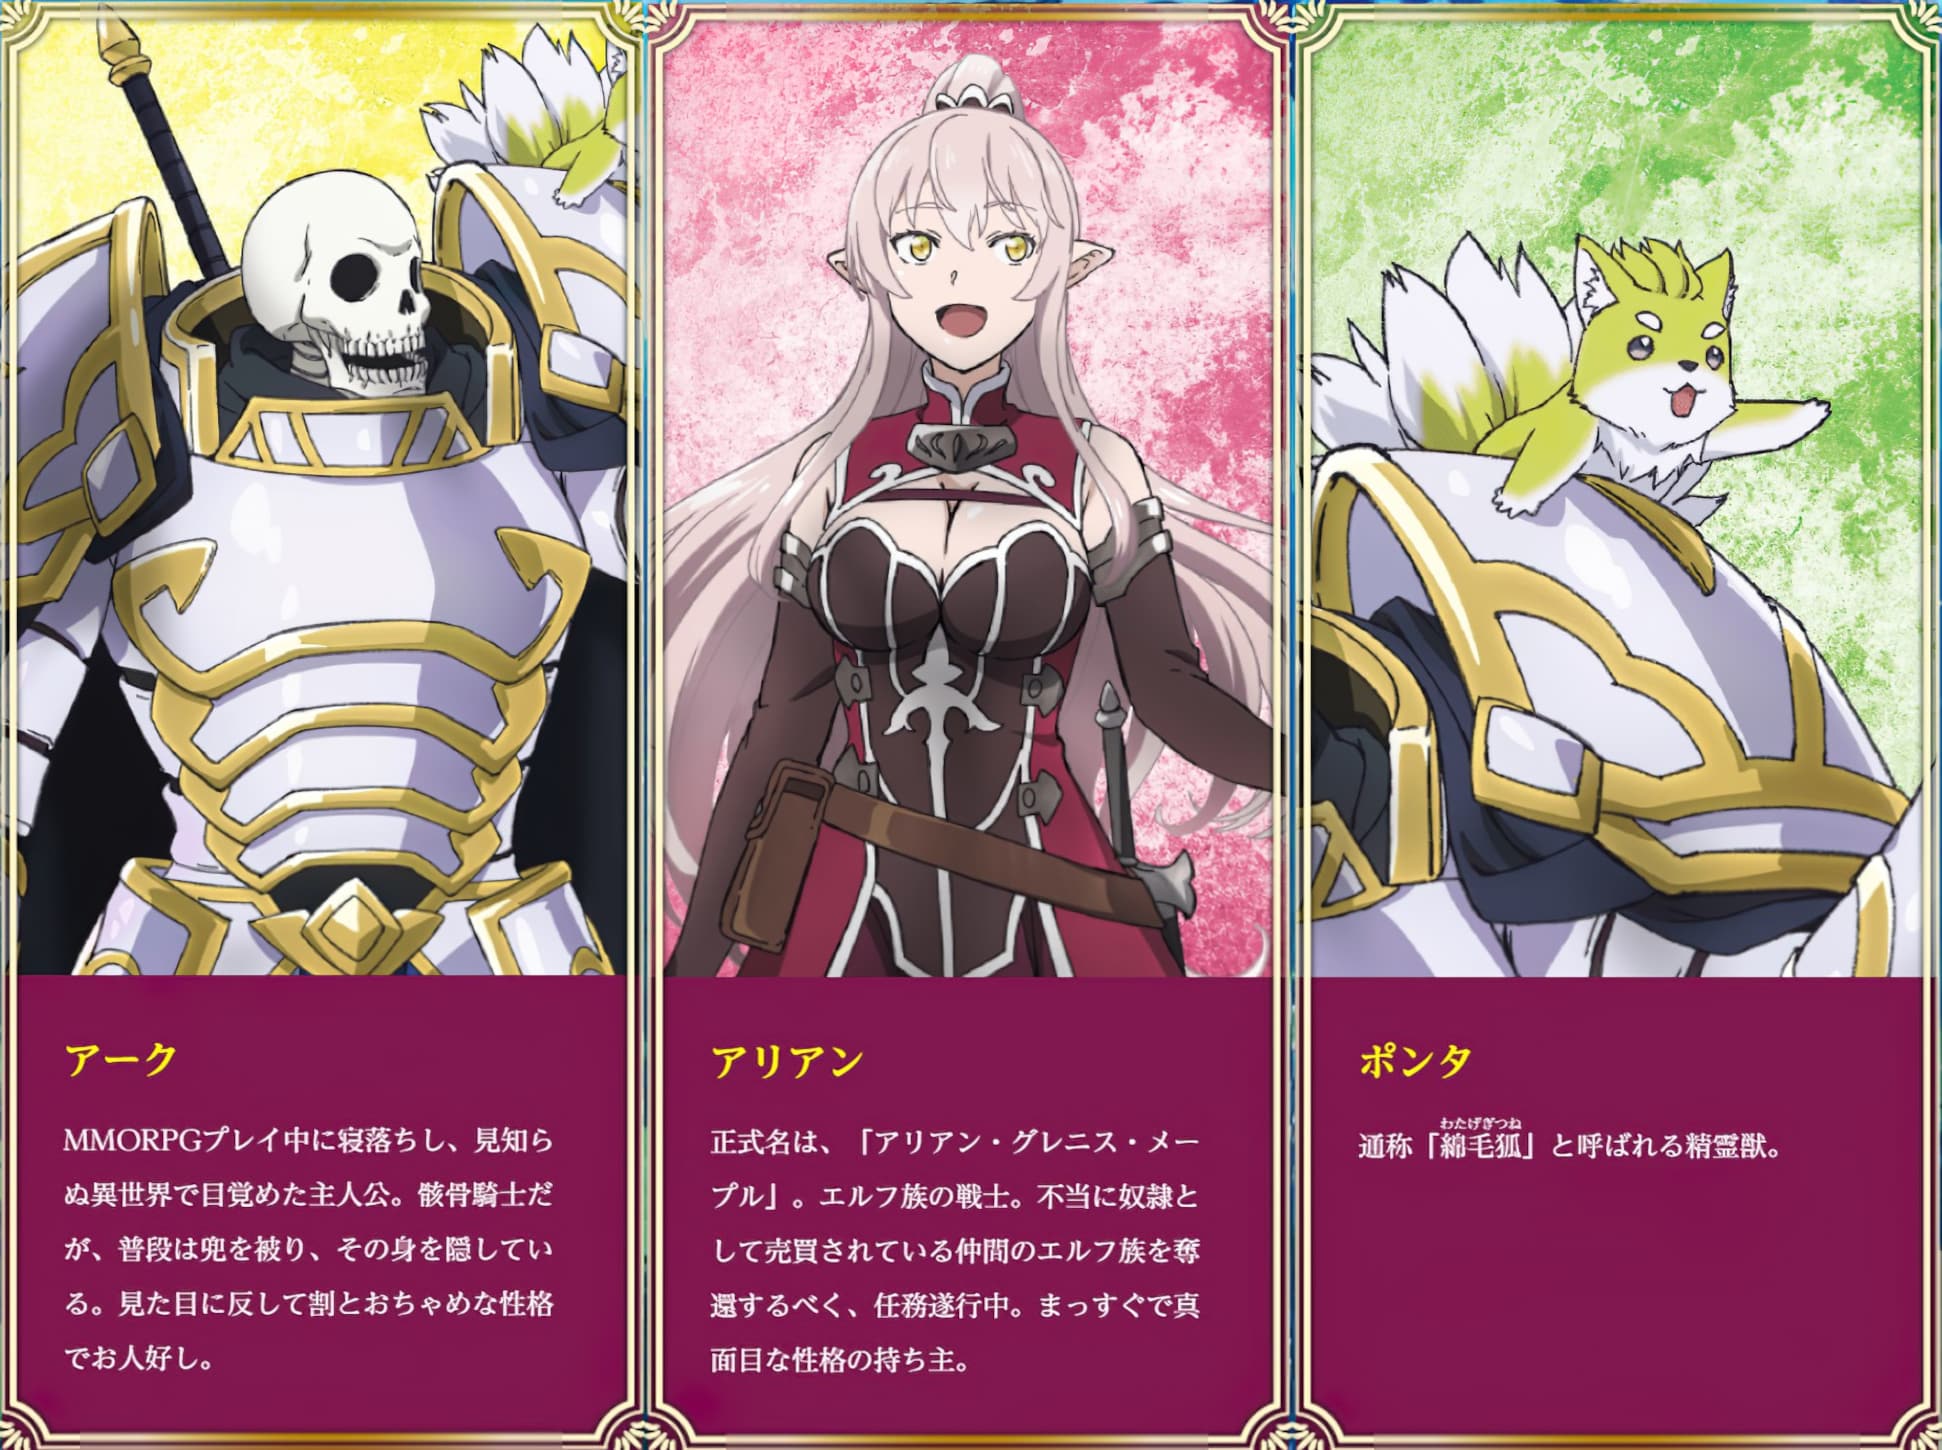 Chara design pour anime Skeleton Knight in Another World